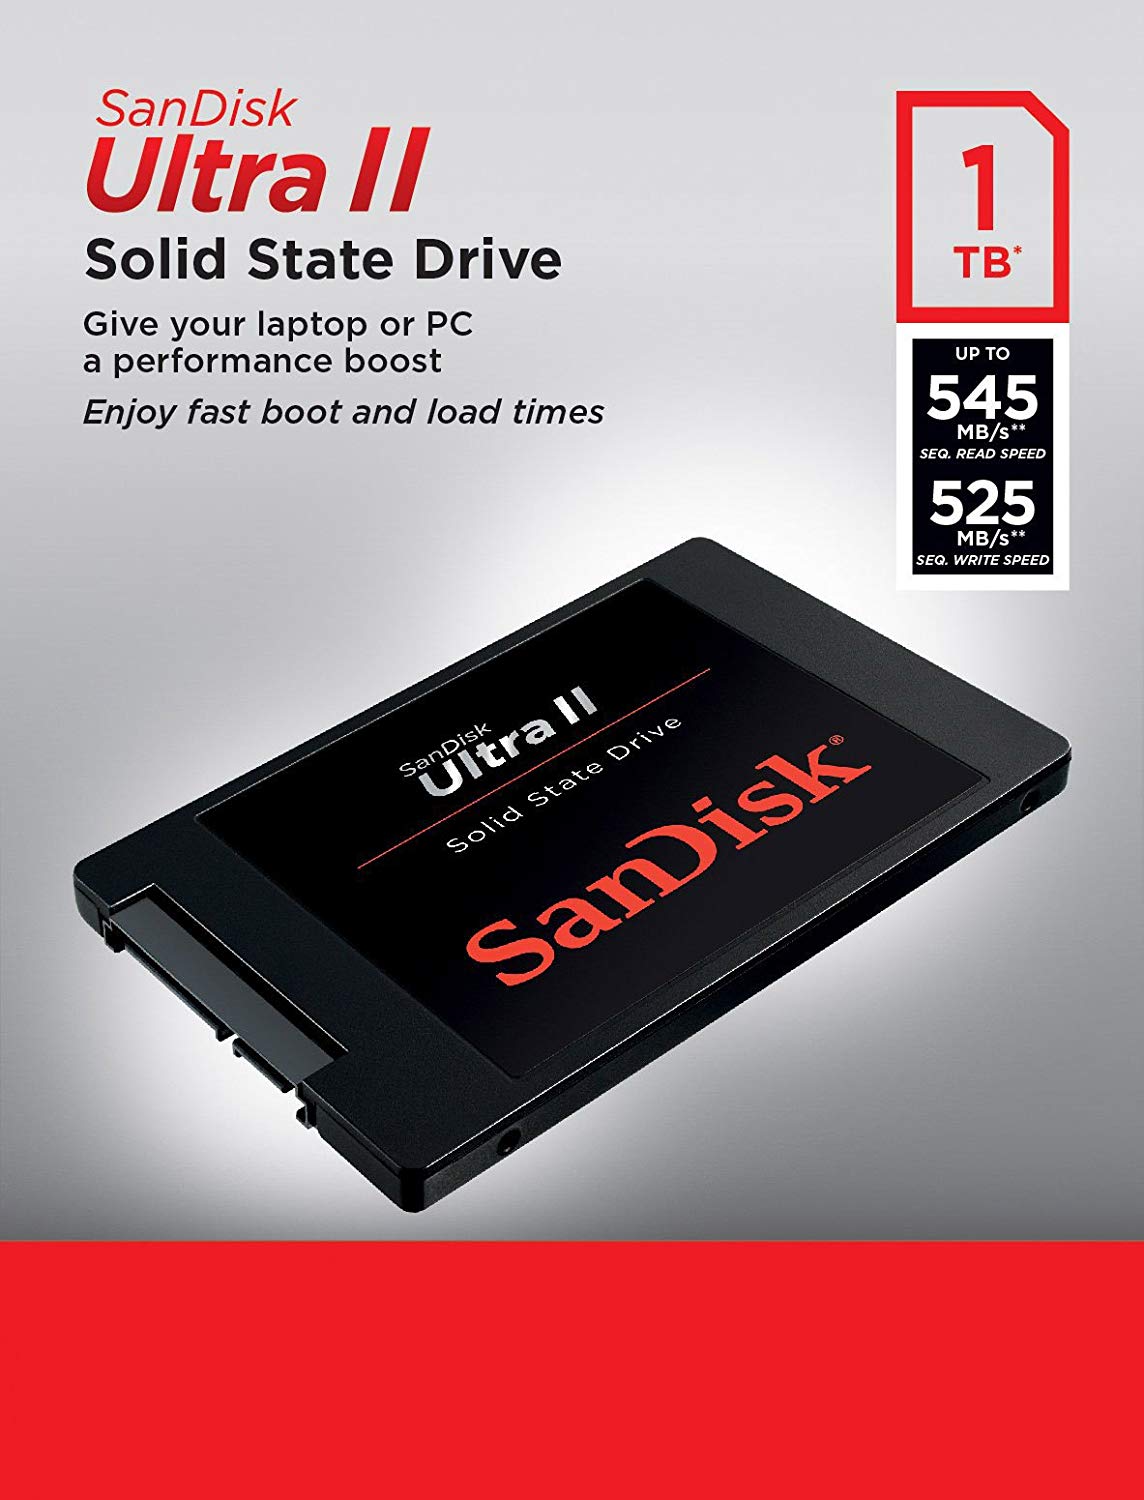 SanDisk 1TB Ultra II SSD Drops to Its Lowest Price Ever [Deal]